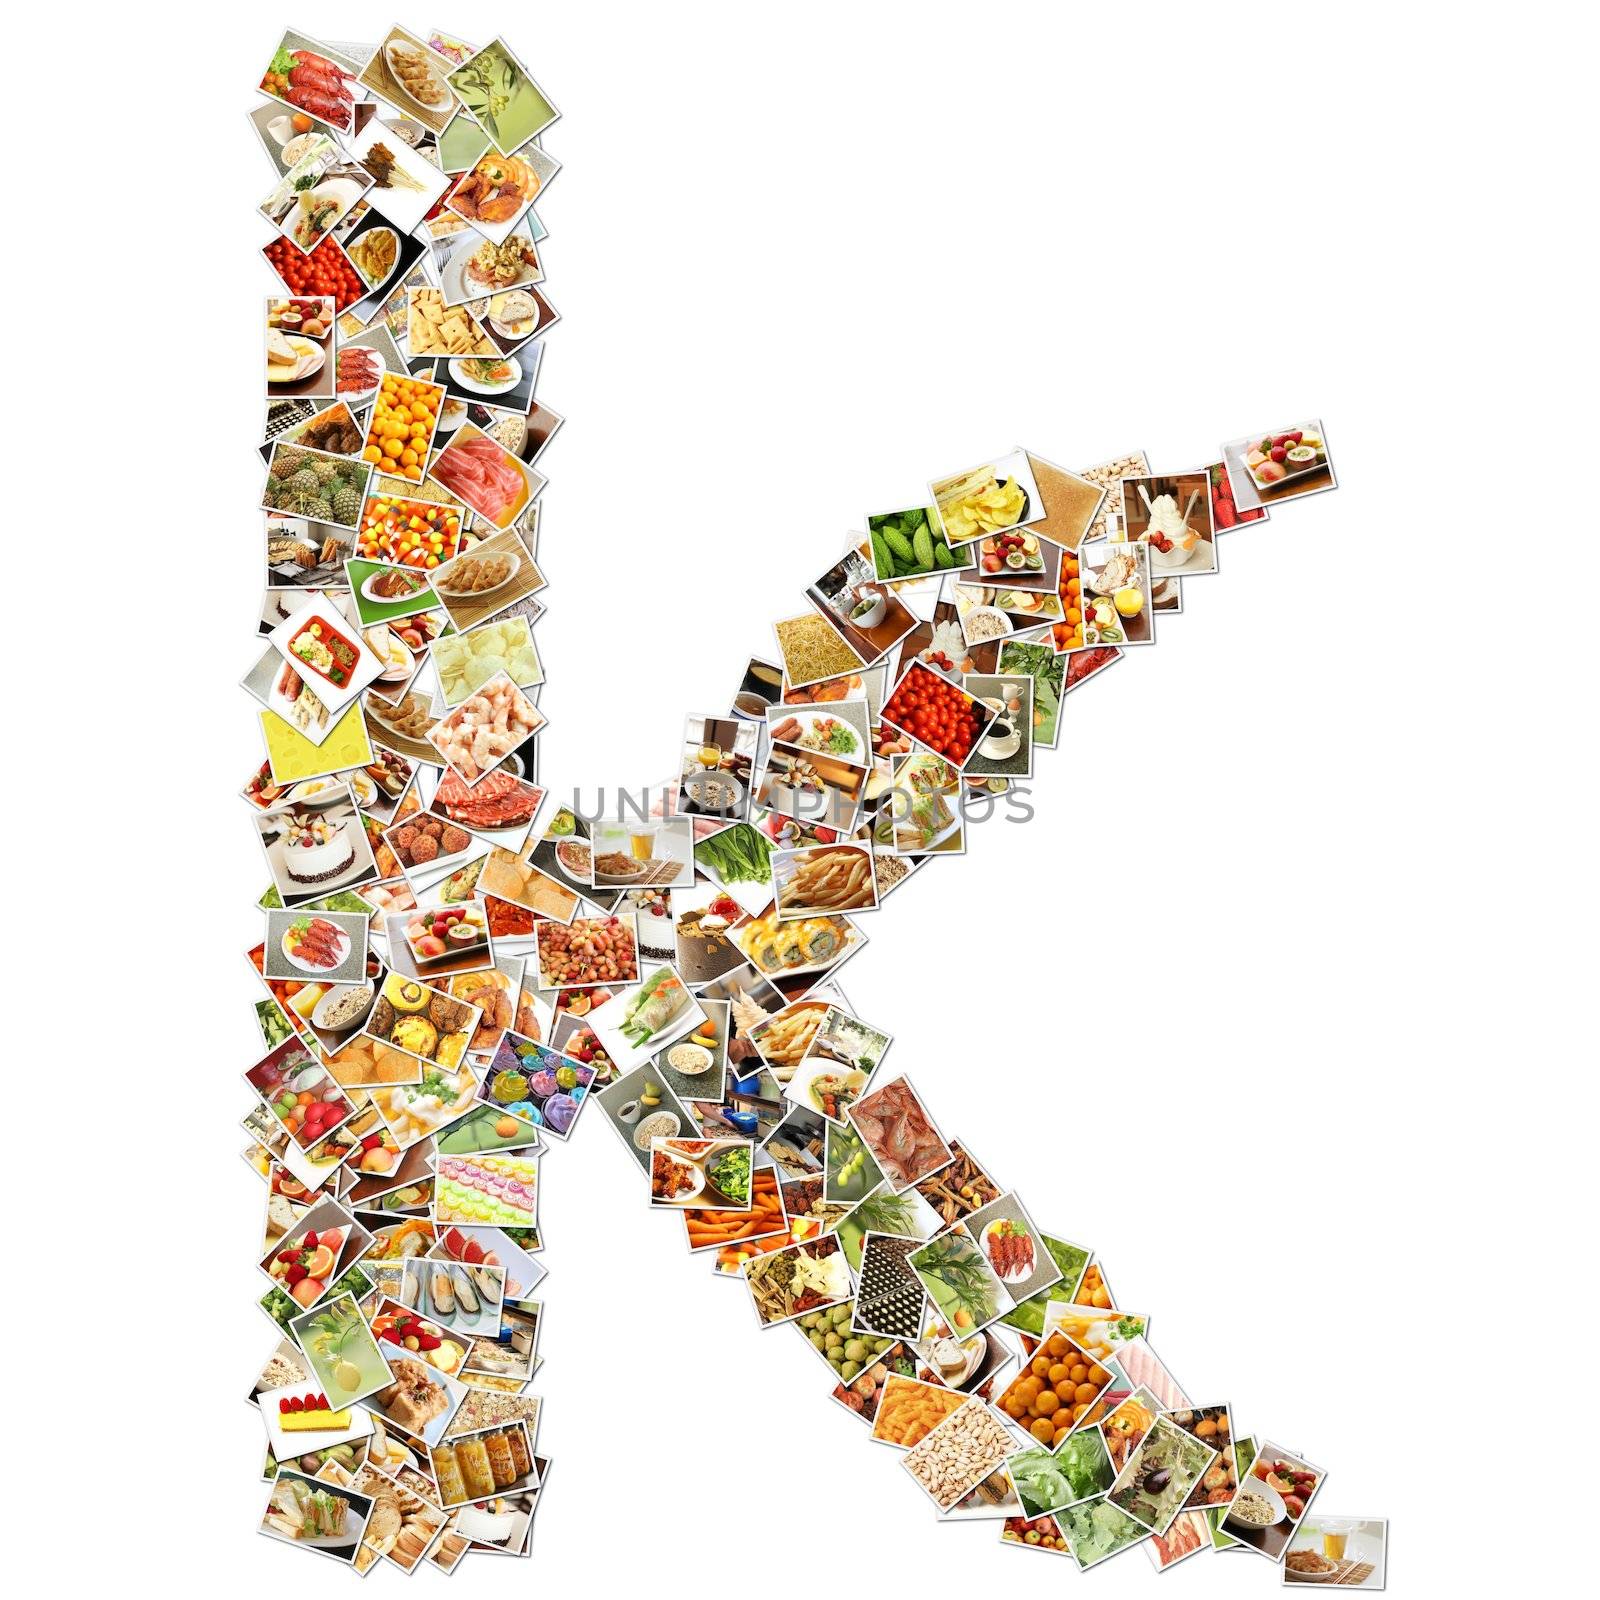 Food Art K Lowercase Shape Collage Abstract